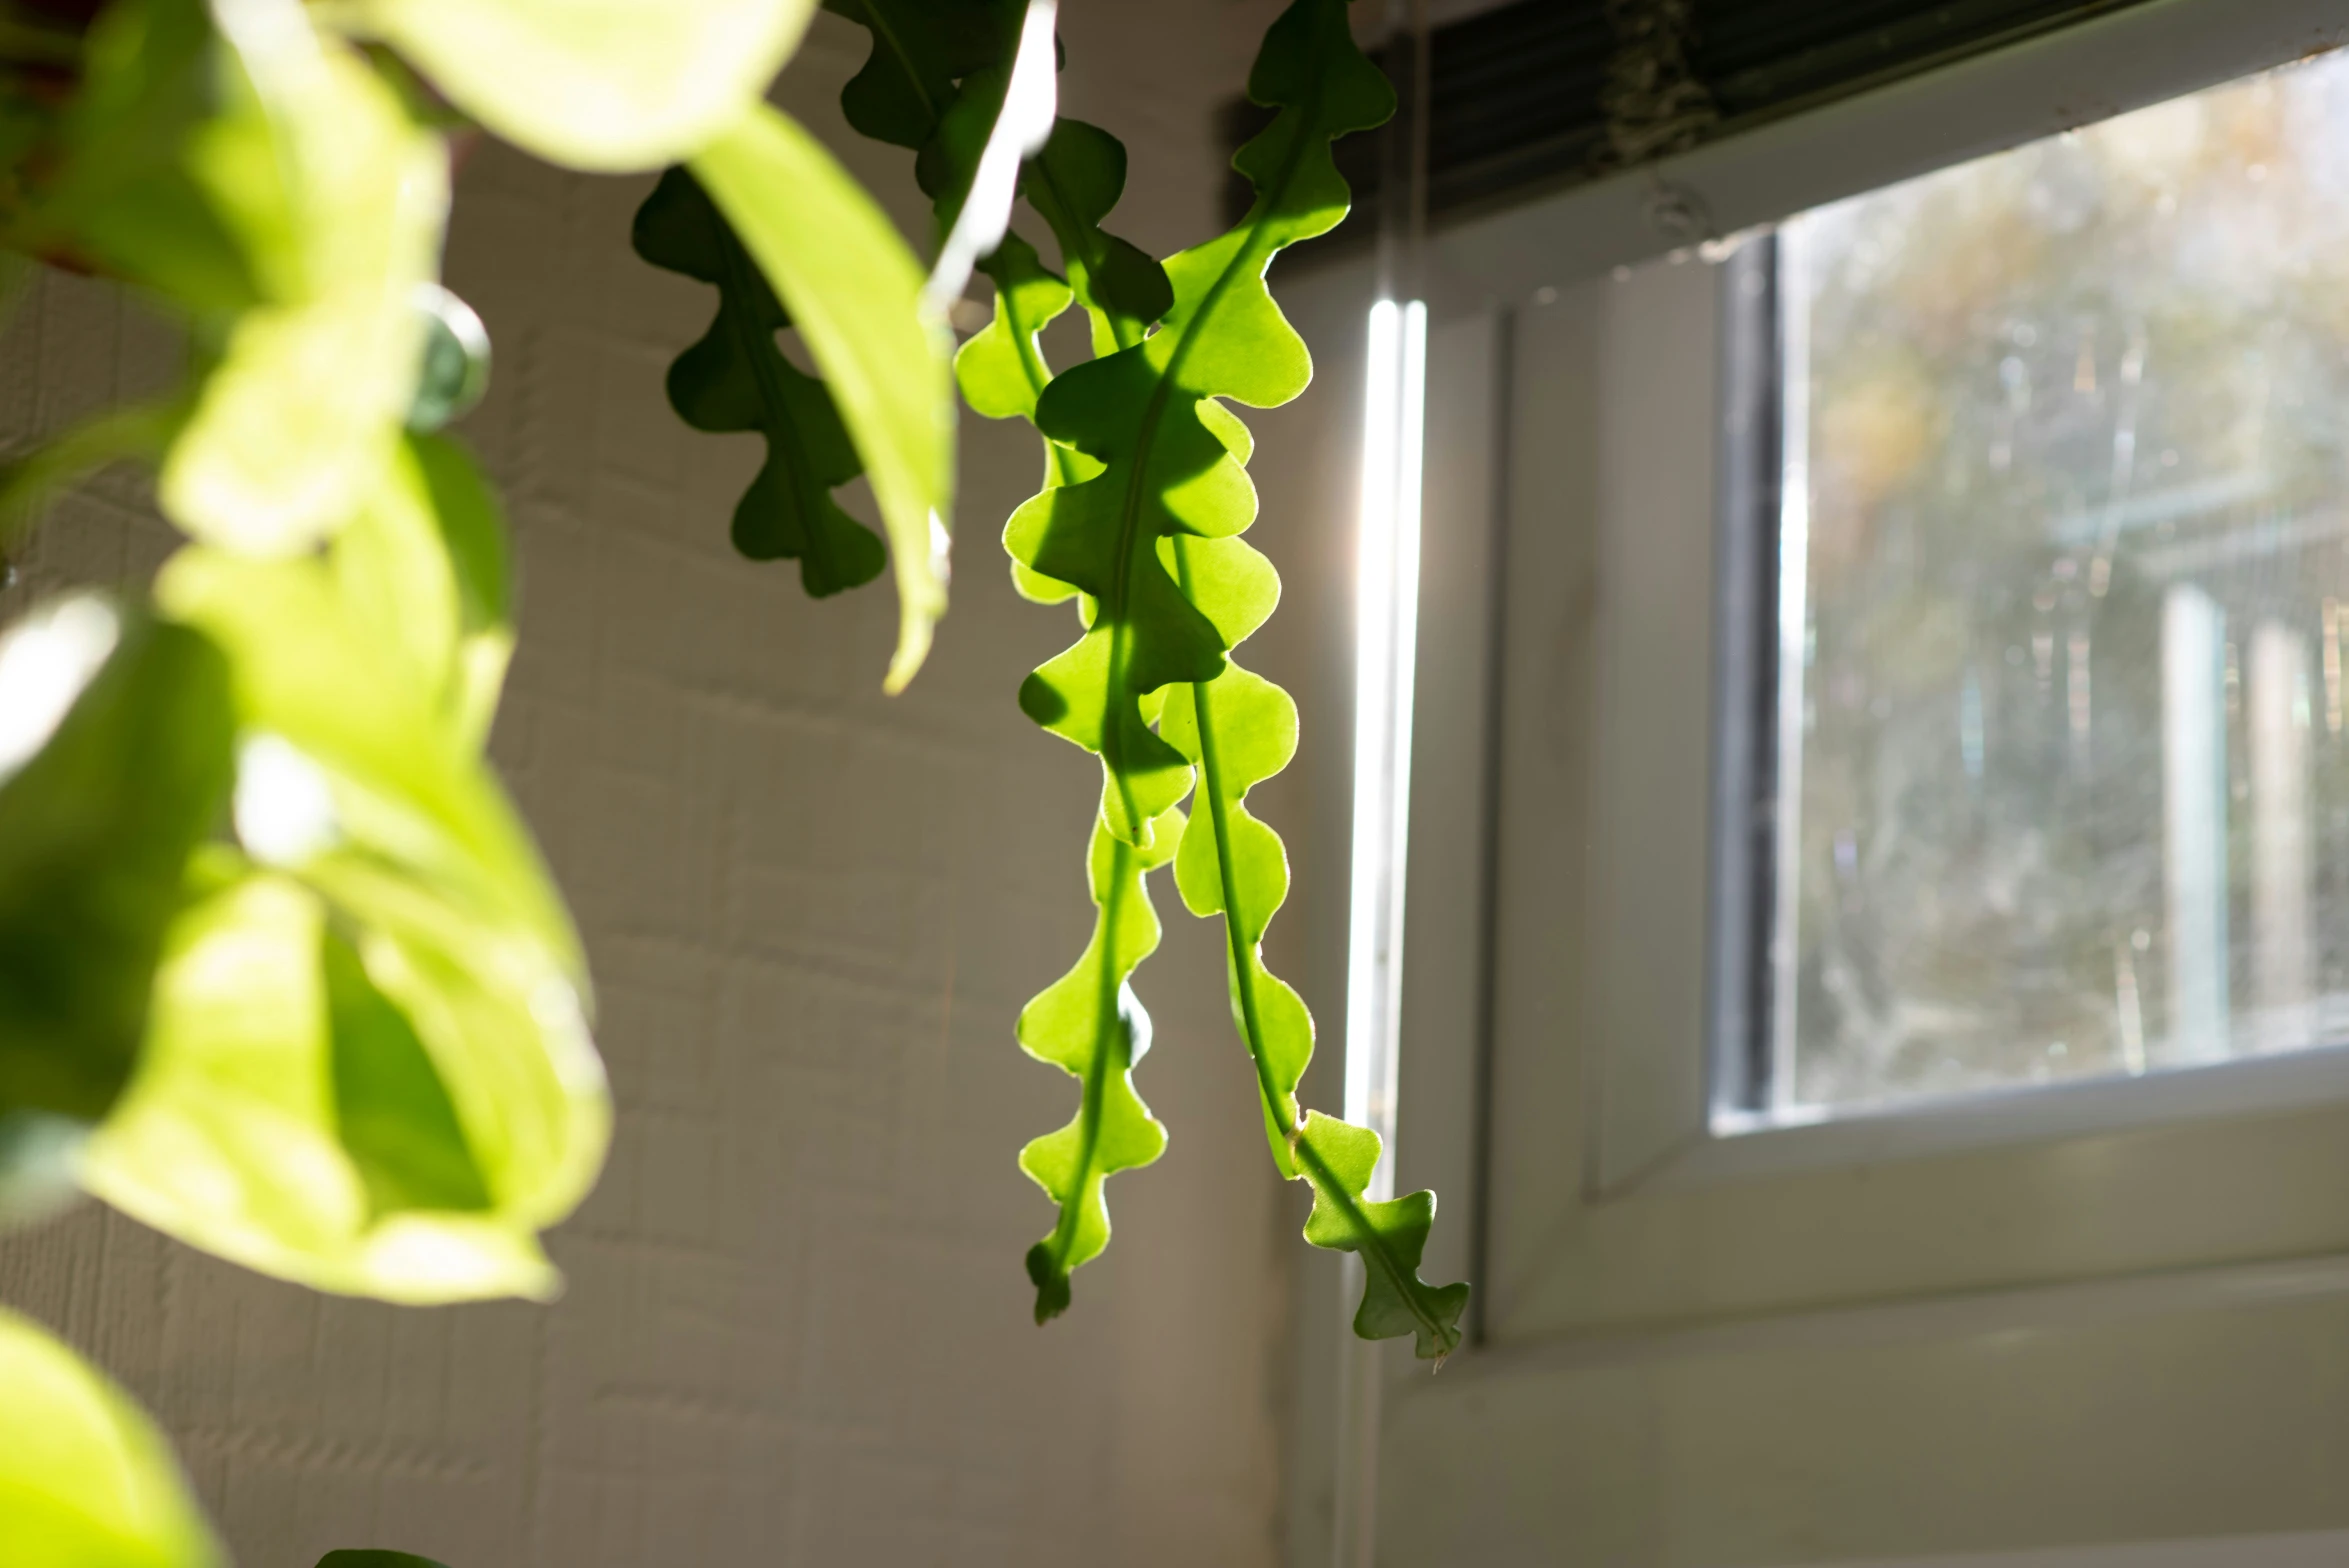 the hanging plant has bright green leaves